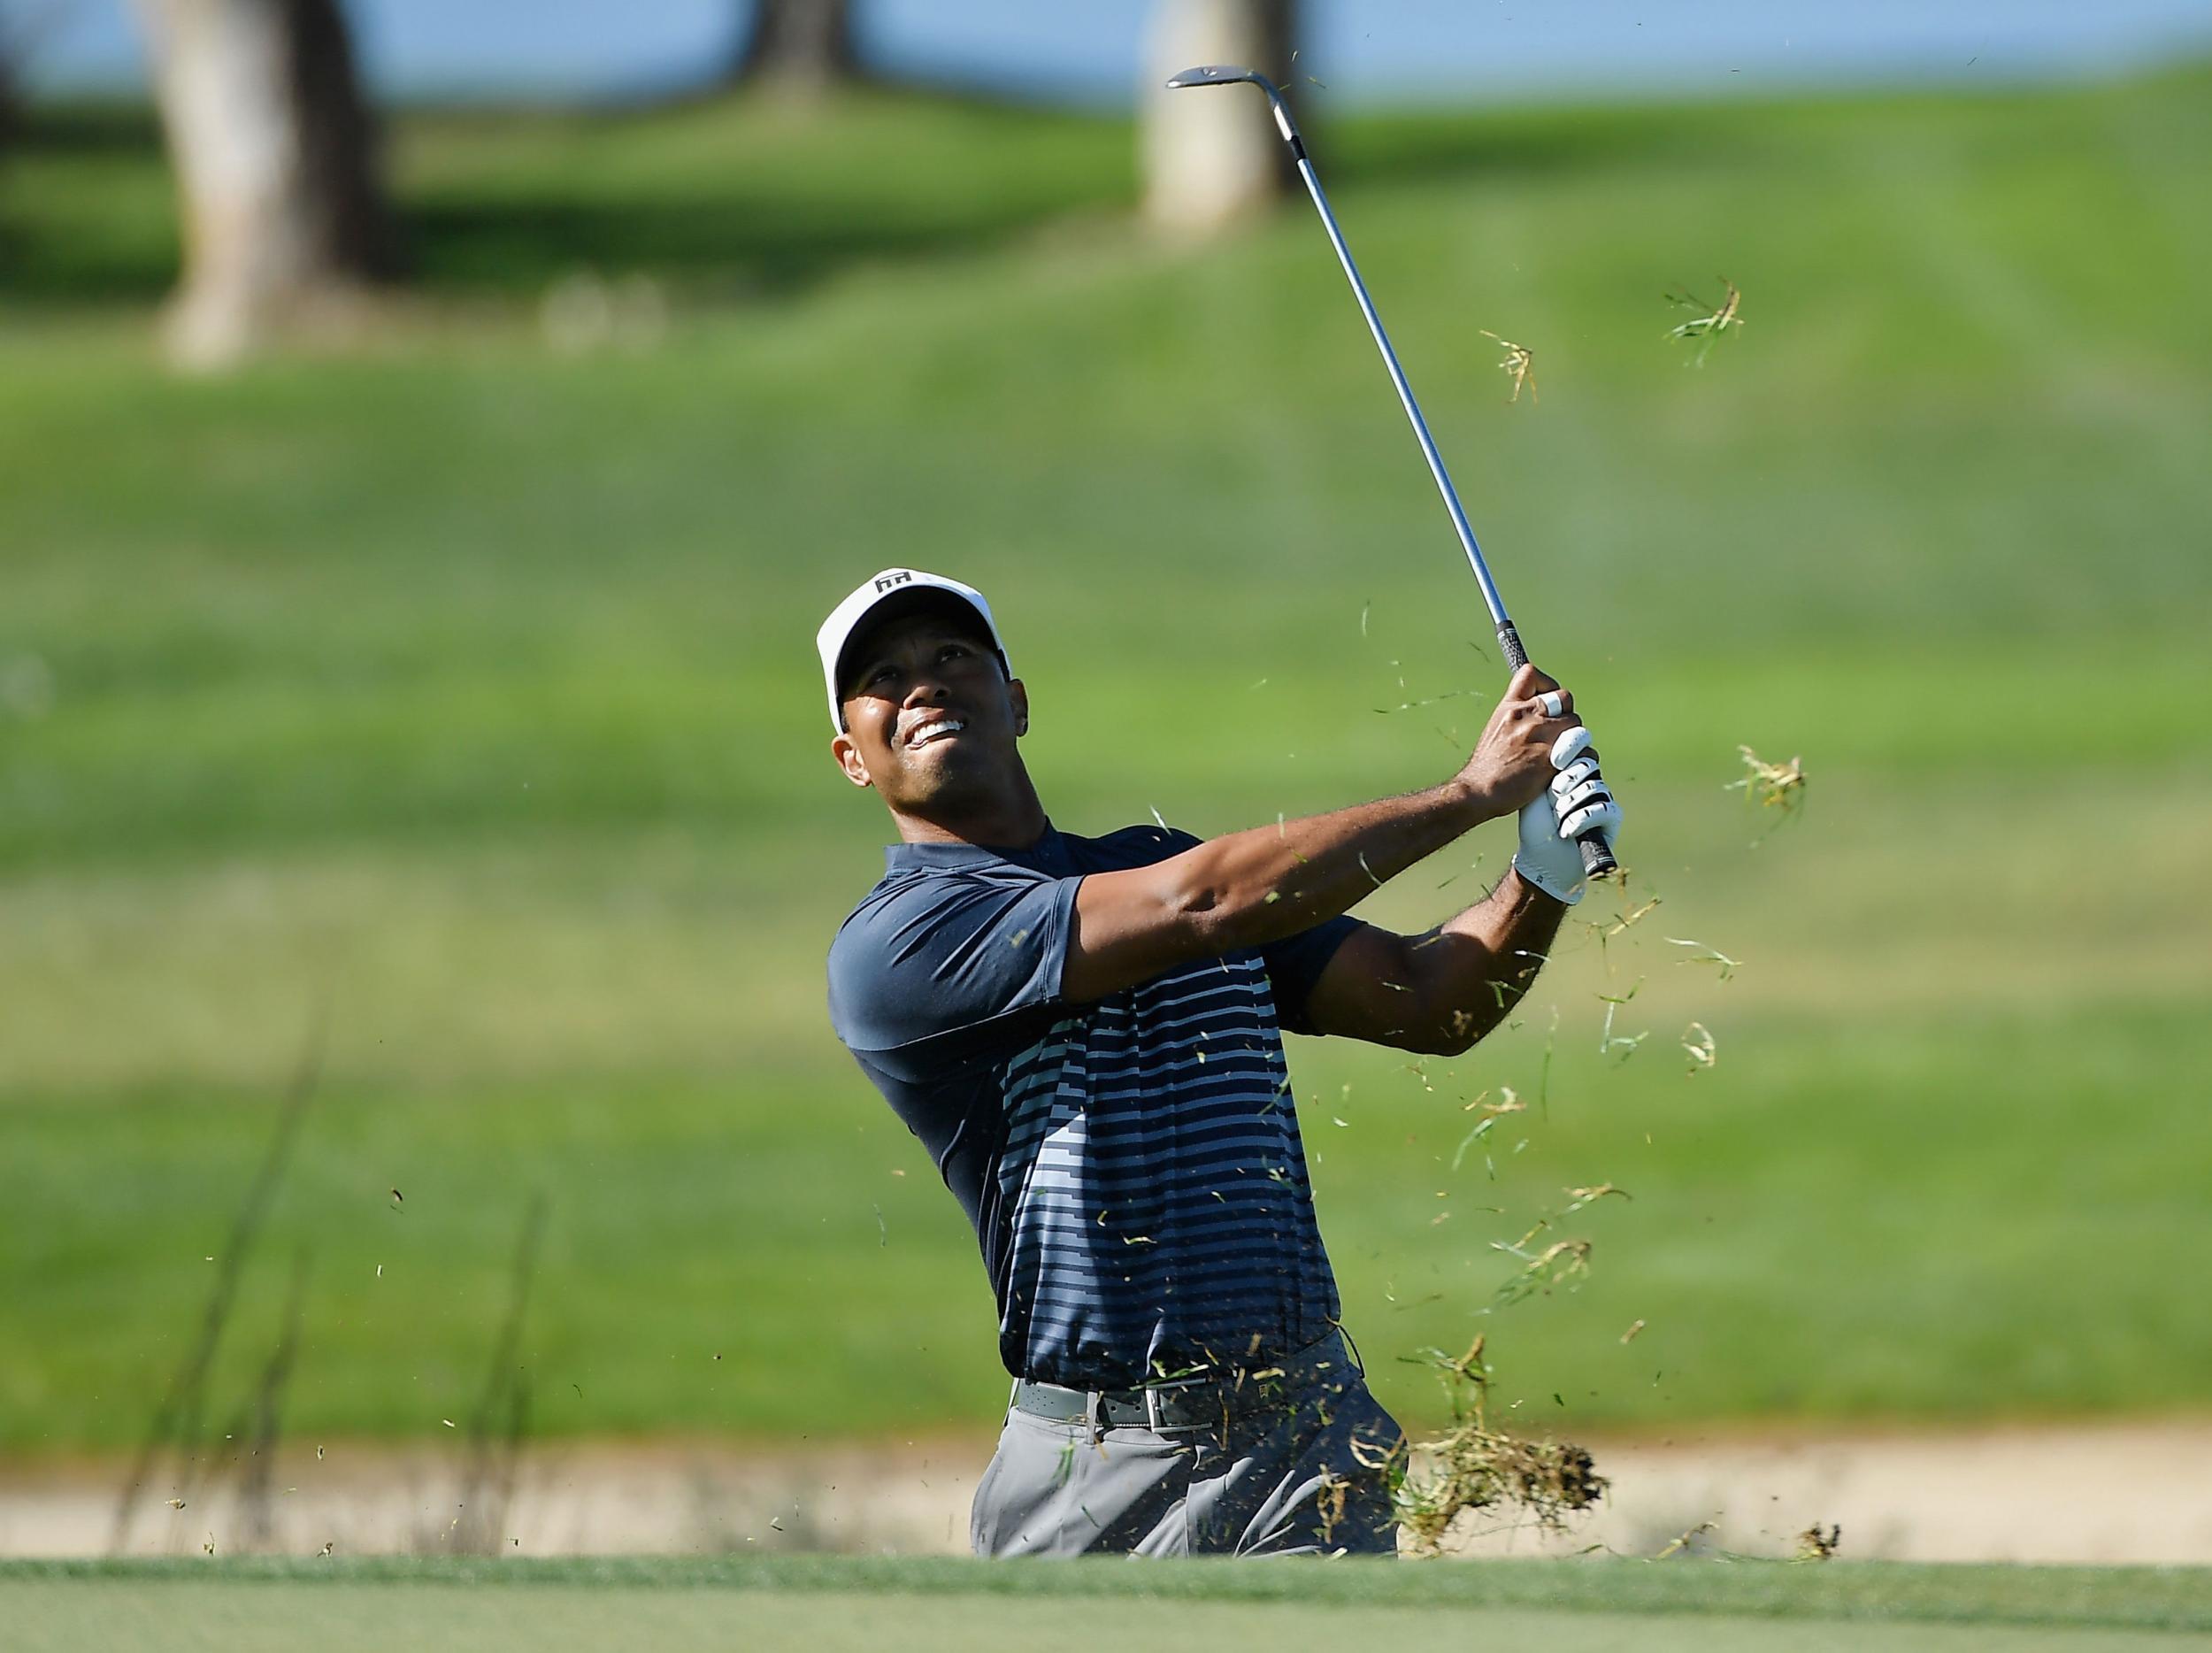 Tiger Woods makes cut at Torrey Pines with last-hole birdie | The Independent